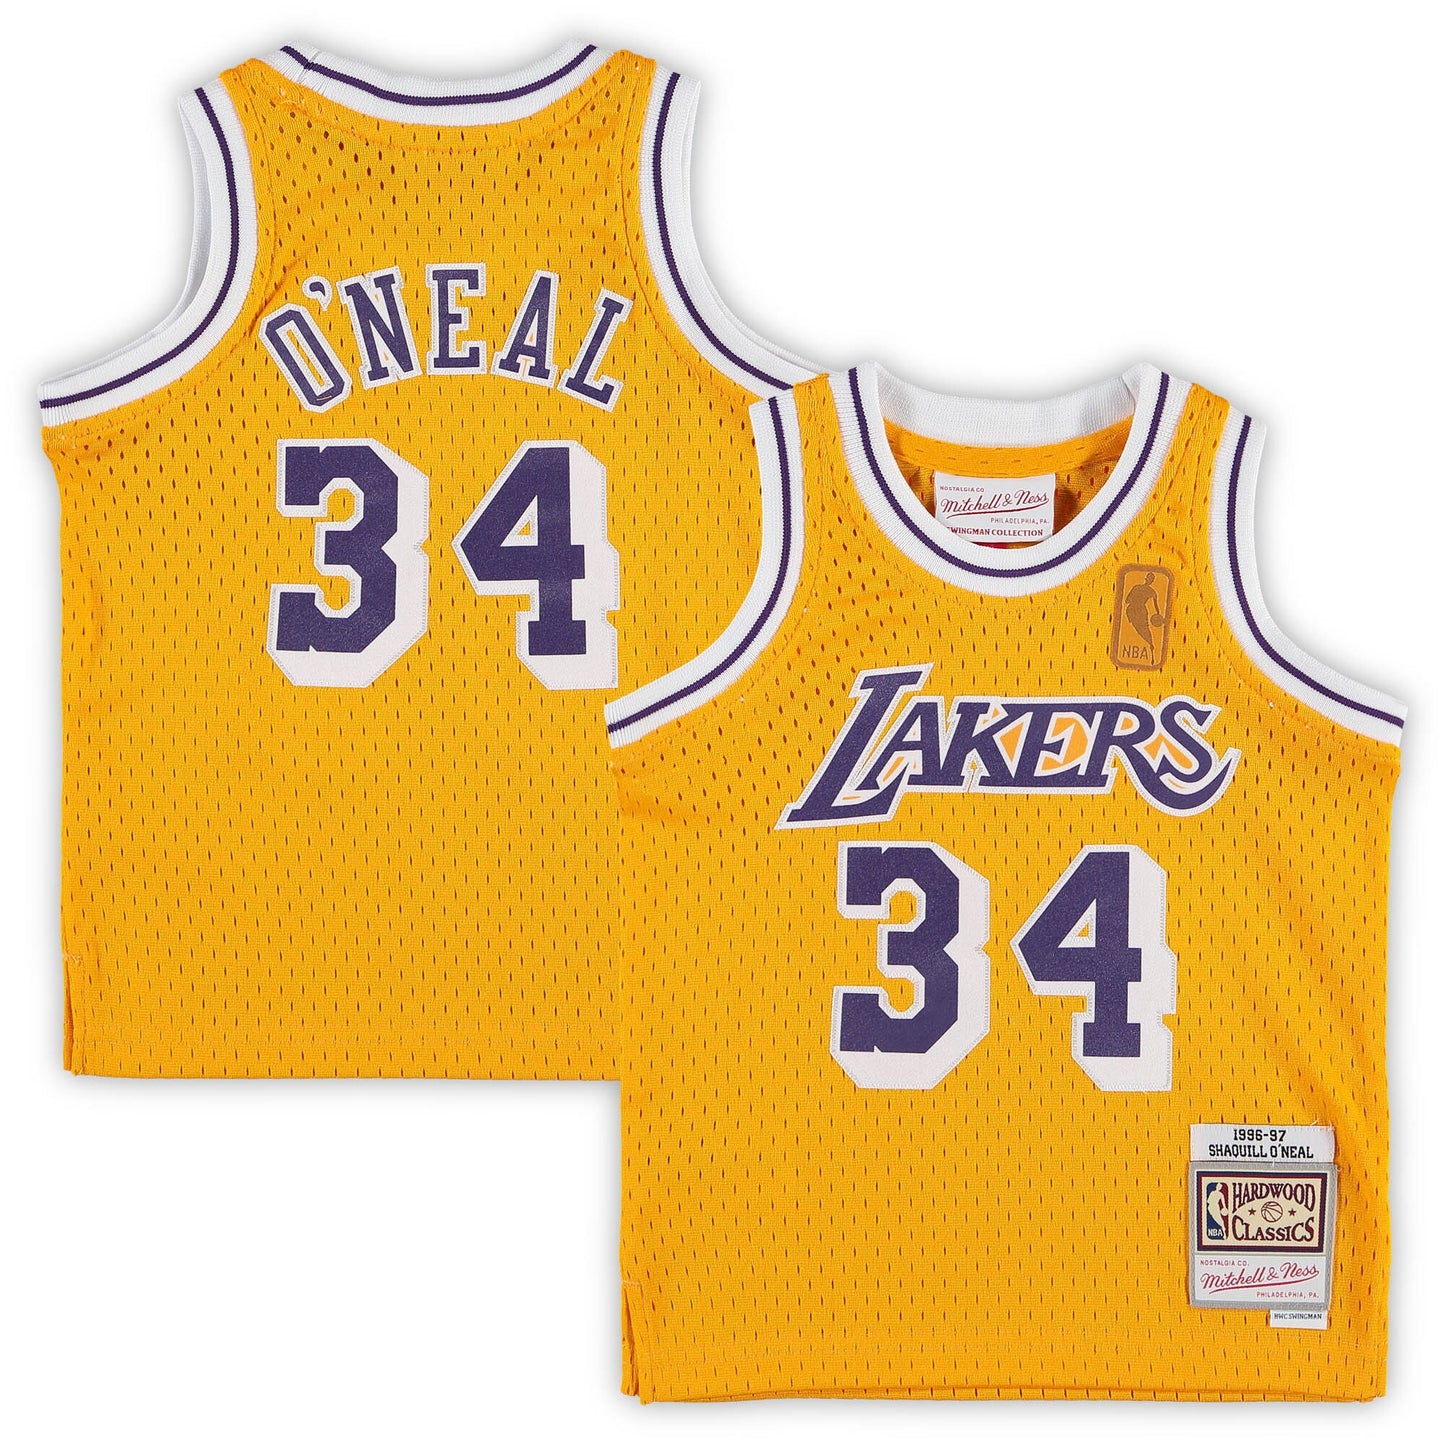 Shaquille O'Neal Los Angeles Lakers Mitchell & Ness Preschool 1996-97 Hardwood Classics Player Jersey - Gold